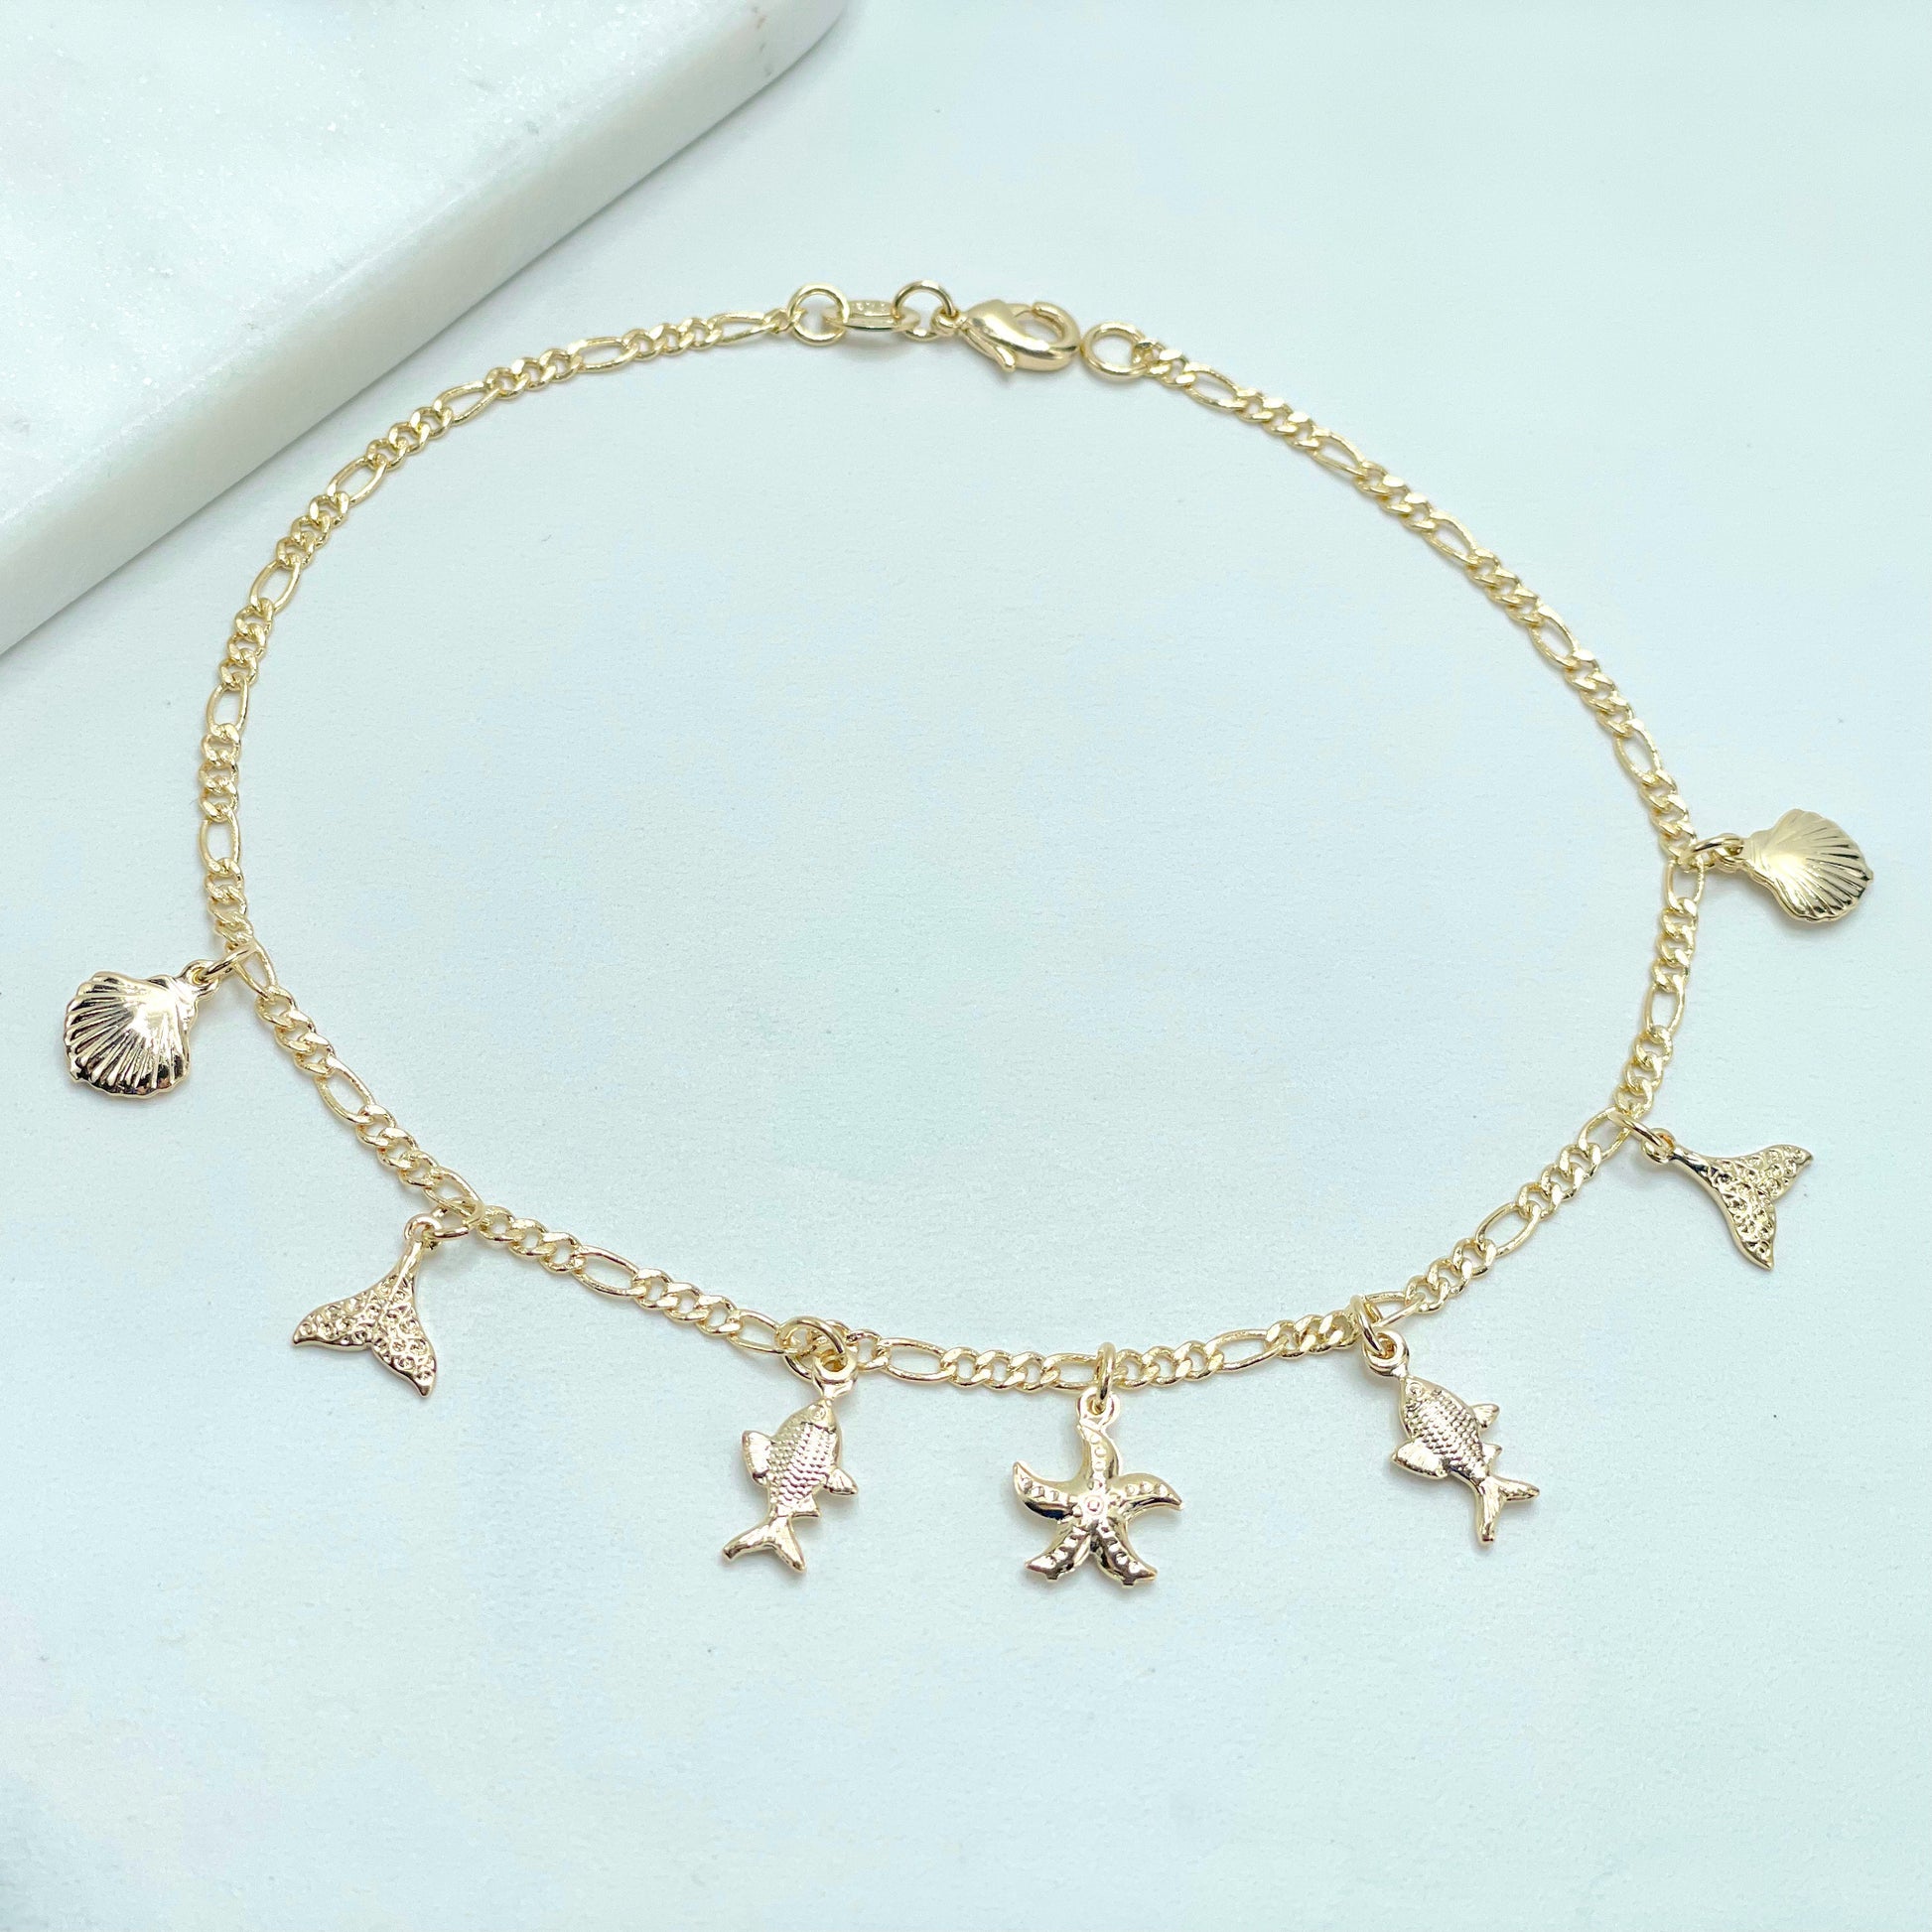 18k Gold Filled 2.4mm Figaro Link Chain, Sea Theme Charms, Starfish, Whale Tale, Fish, Shell, Anklet Wholesale Jewelry Making Supplies